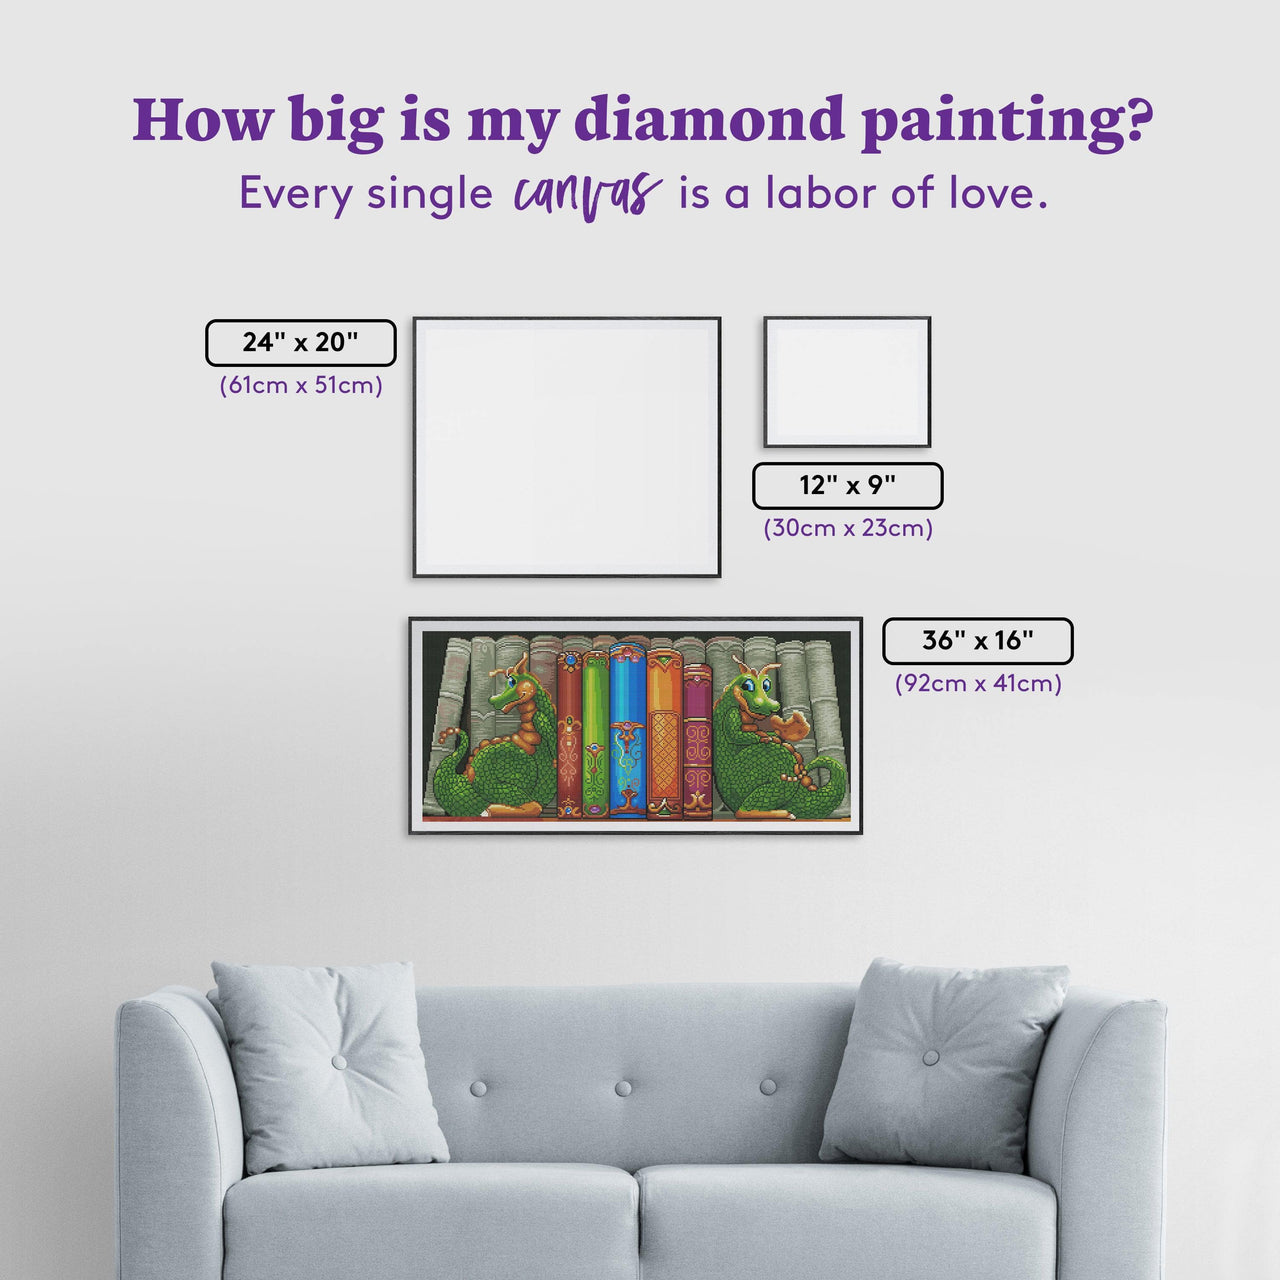 Diamond Painting Customized Bookshelf 36" x 16″ (92cm x 41cm) / Round with 52 Colors including 2 ABs / 47,269